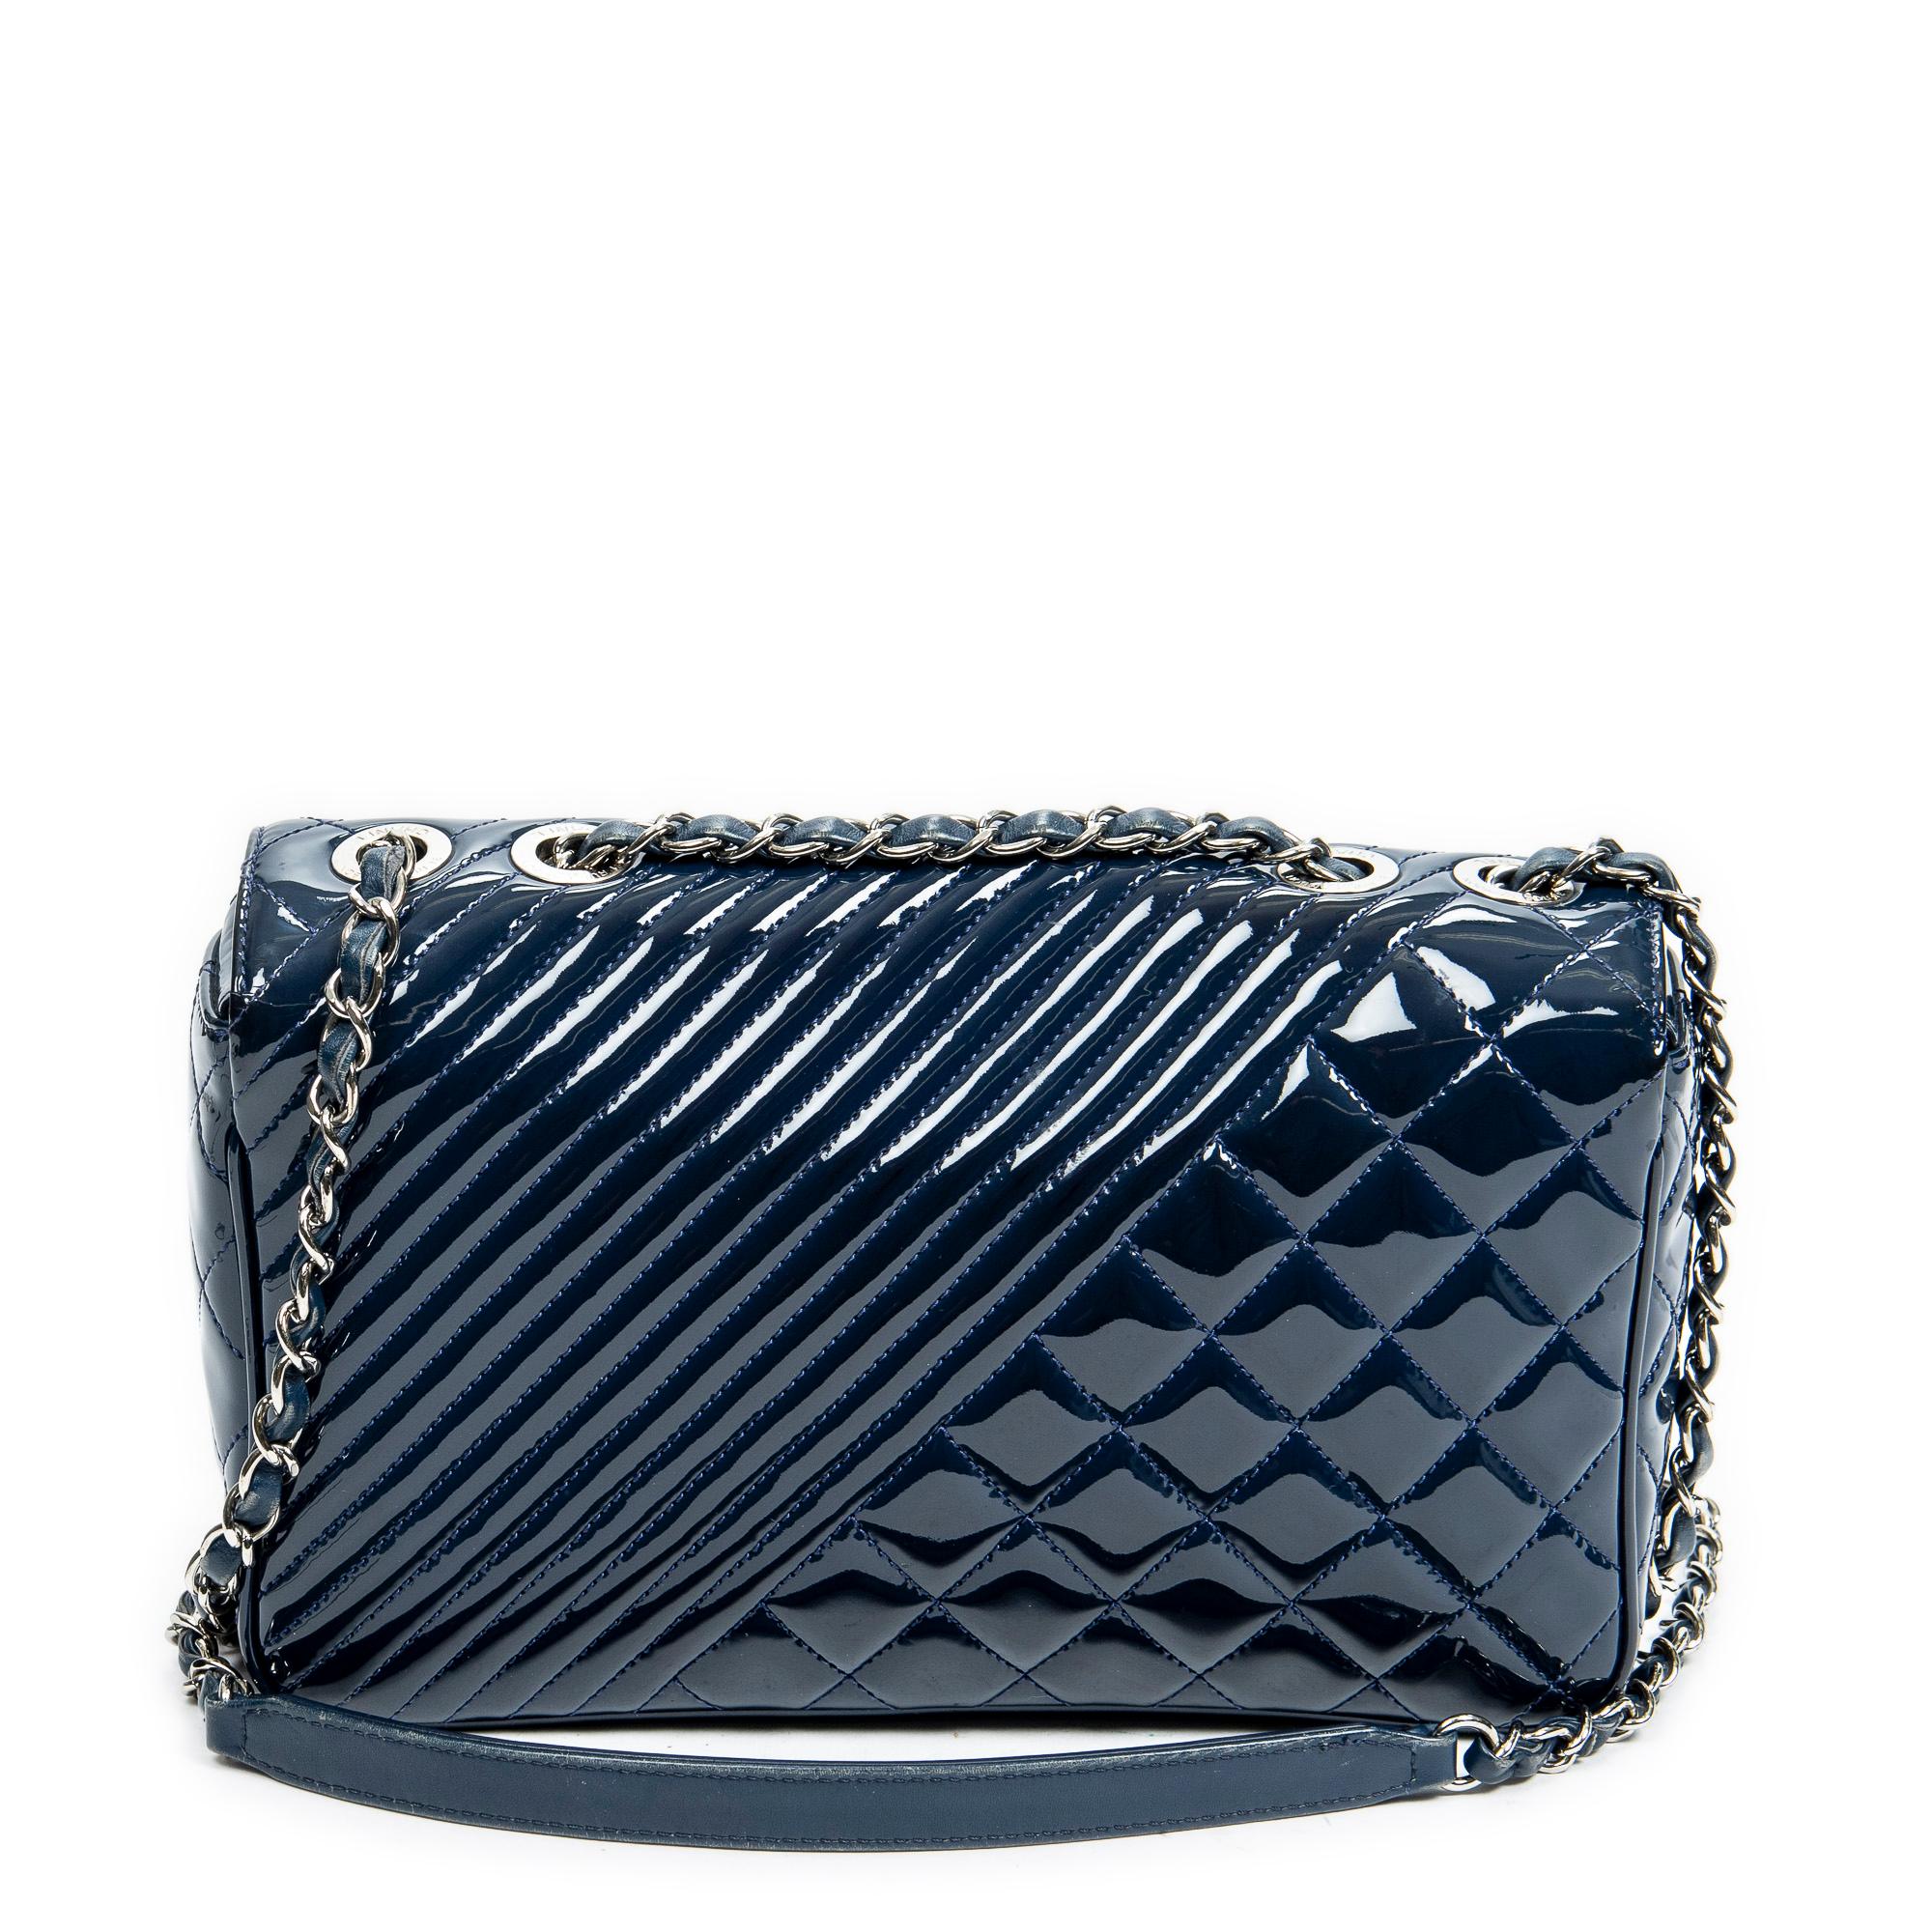 Meet the Chanel Blue CC Medium Coco Boy Flap: a statement of sophistication. Crafted from quilted patent leather in a captivating blue hue, this bag exudes elegance. Adorned with gleaming gold hardware, including the iconic CC turnlock closure, it